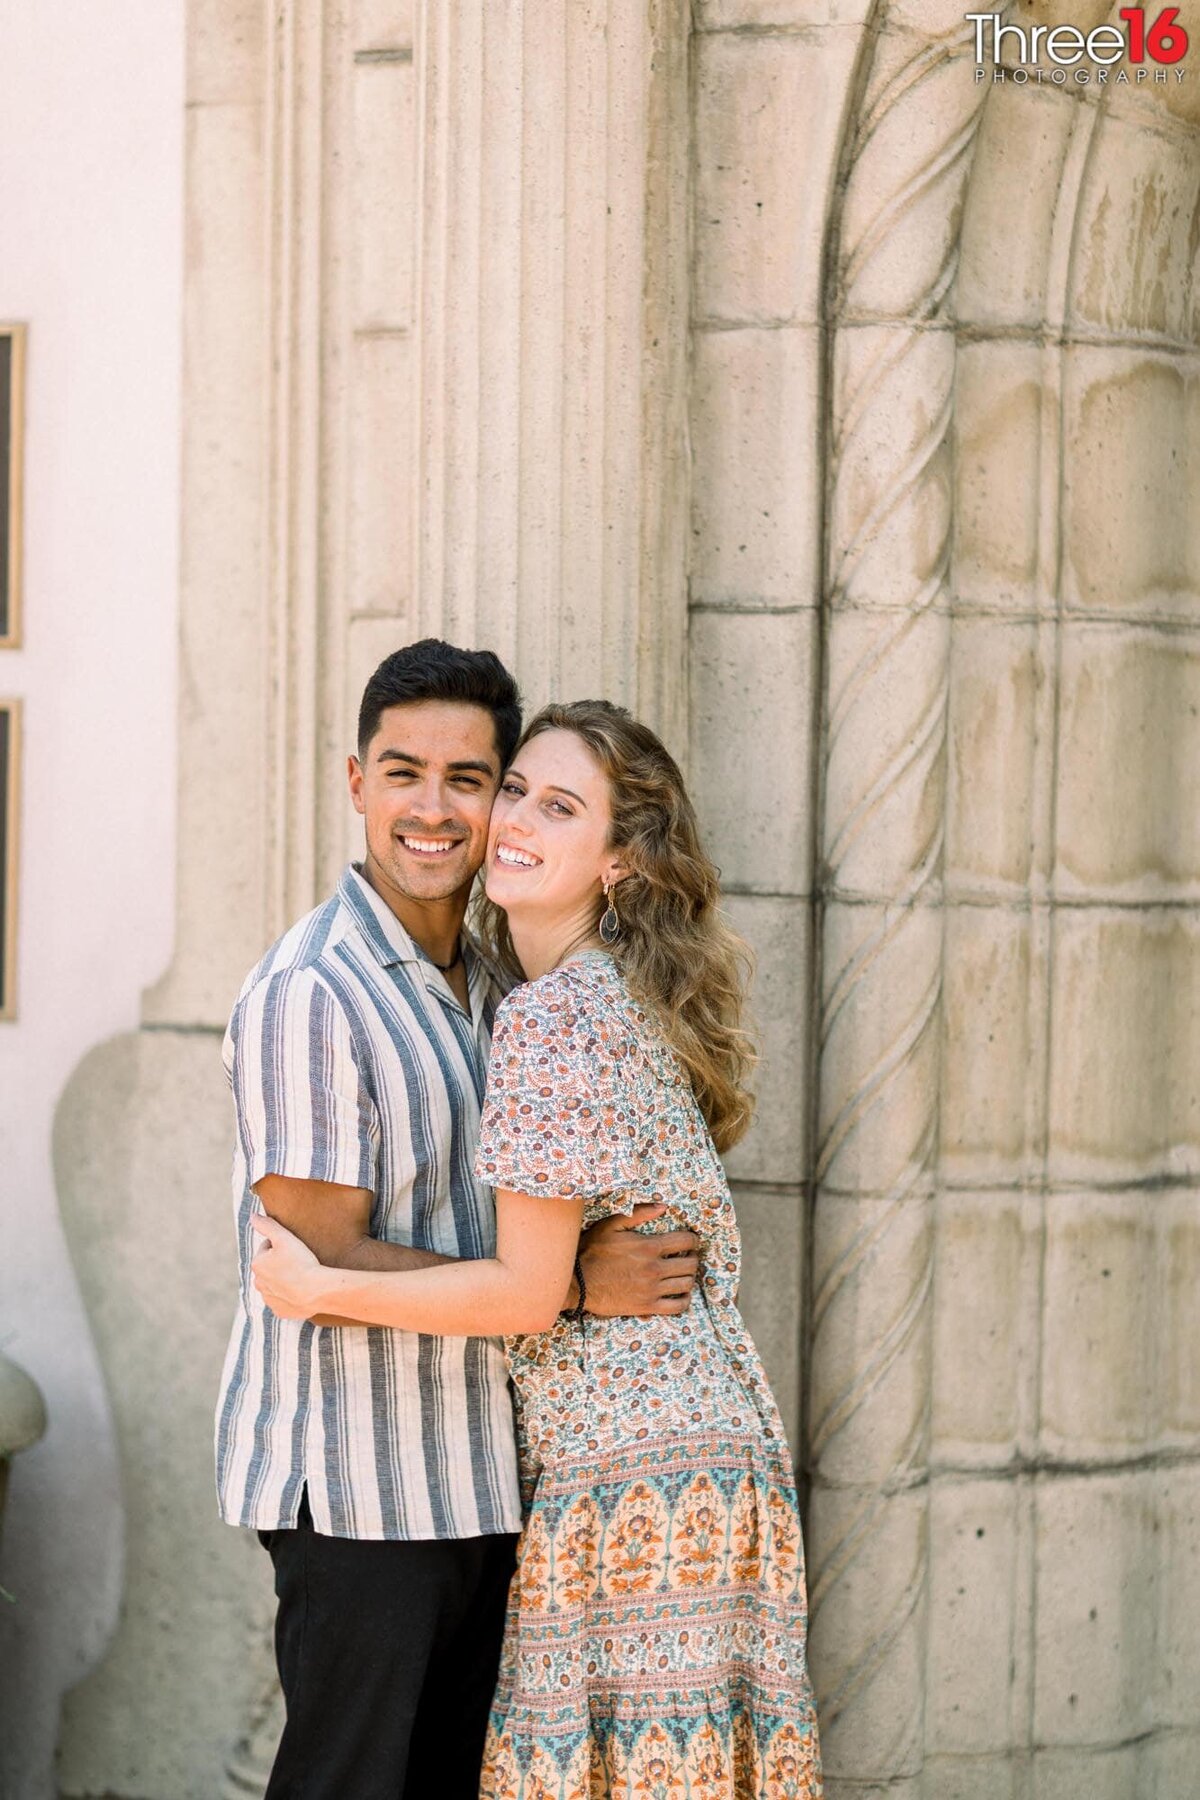 Big smiles for engaged couple during their Claremont Train Station engagement photo shoot